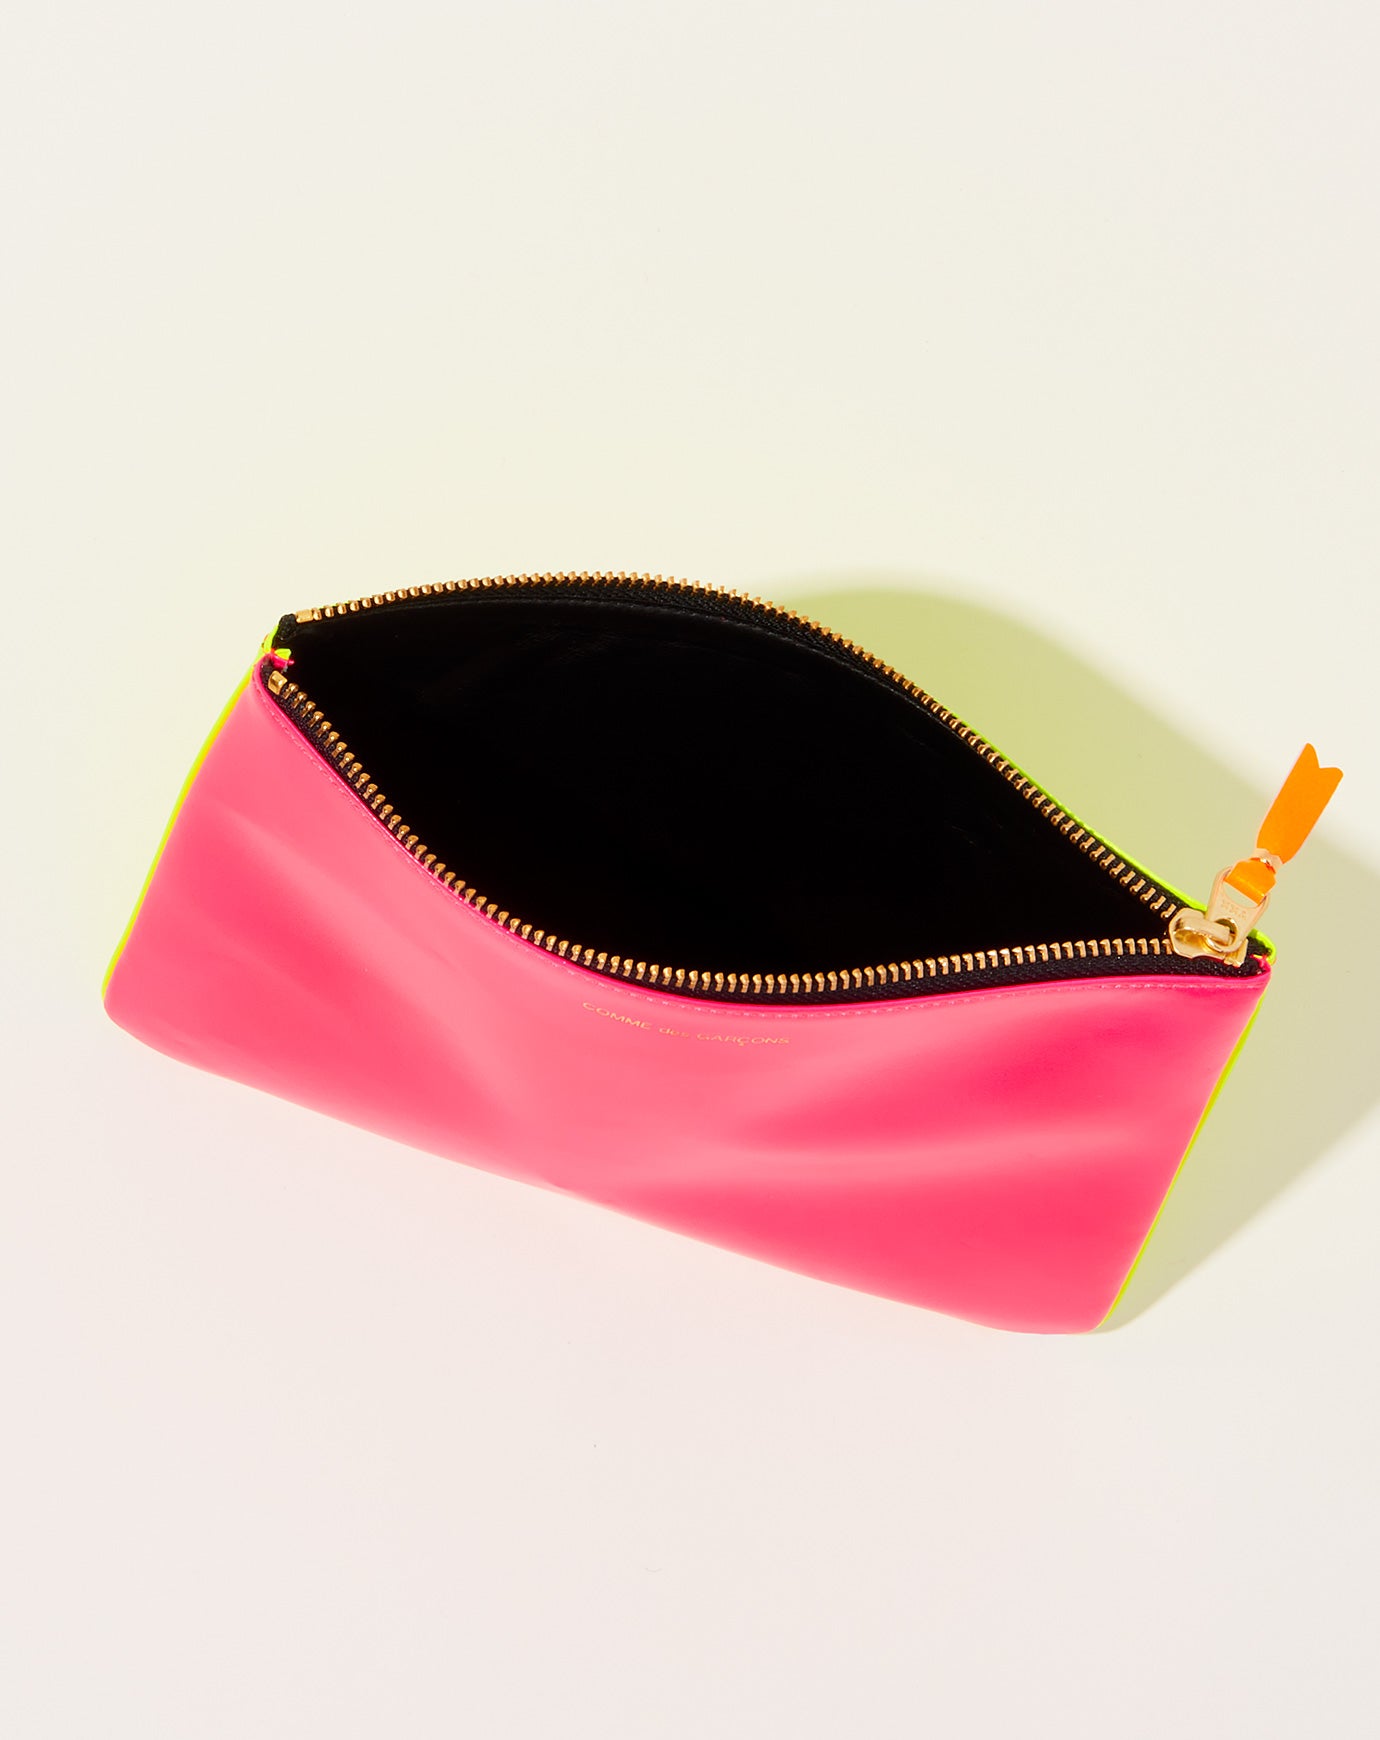 Comme des Garçons  Super Fluo Wallet Pouch in Pink and Yellow